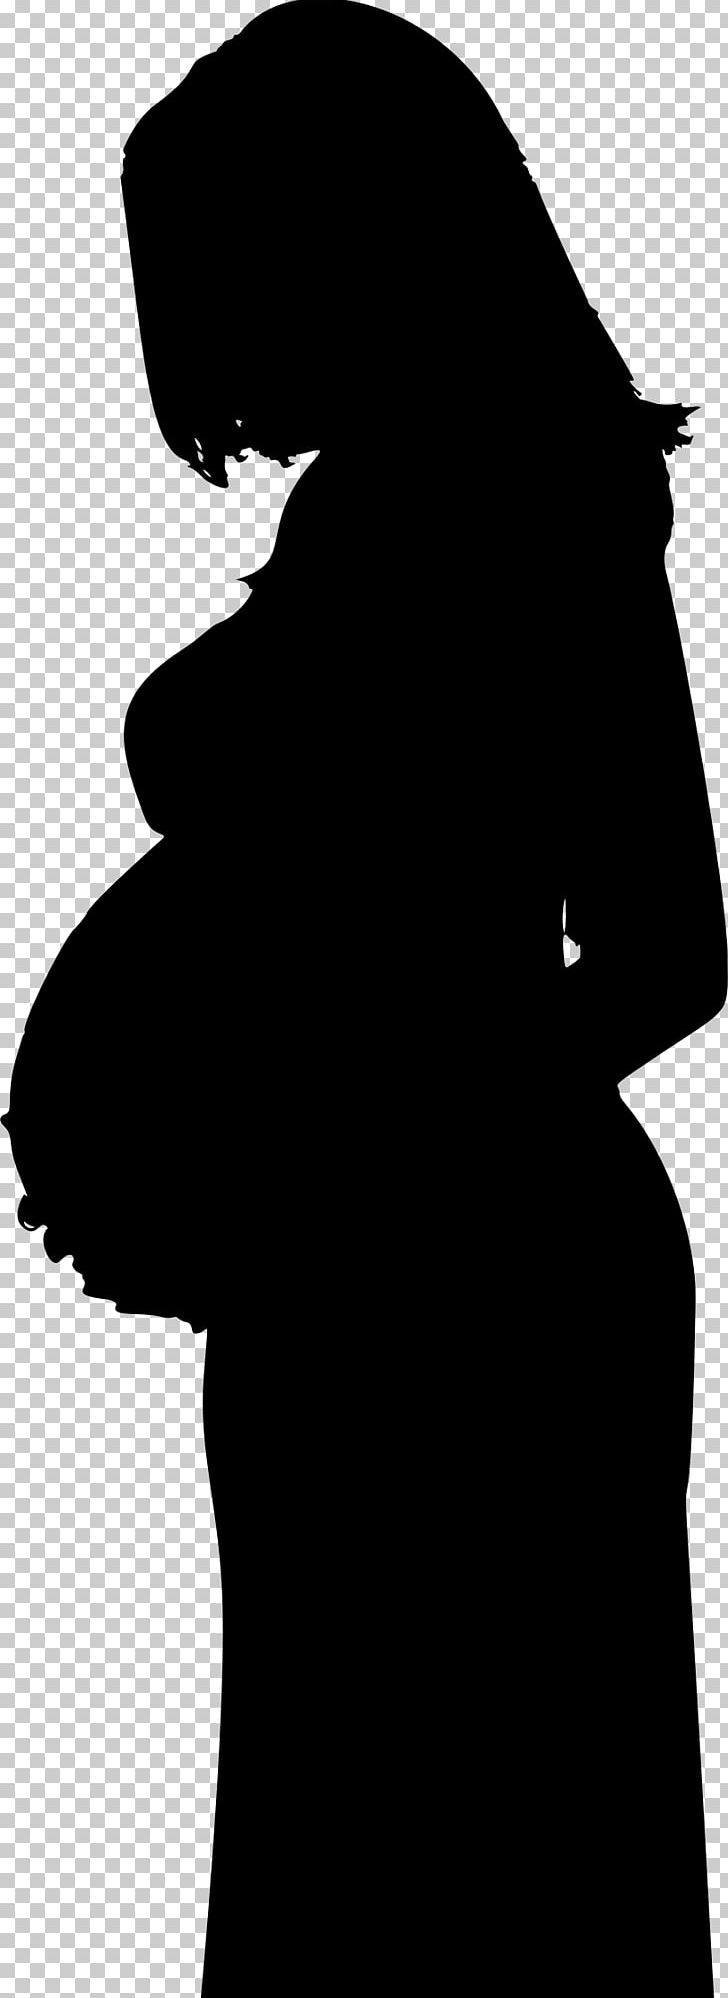 Pregnancy Mother Silhouette Woman PNG, Clipart, Abortion, Black, Black And White, Child, Childbirth Free PNG Download